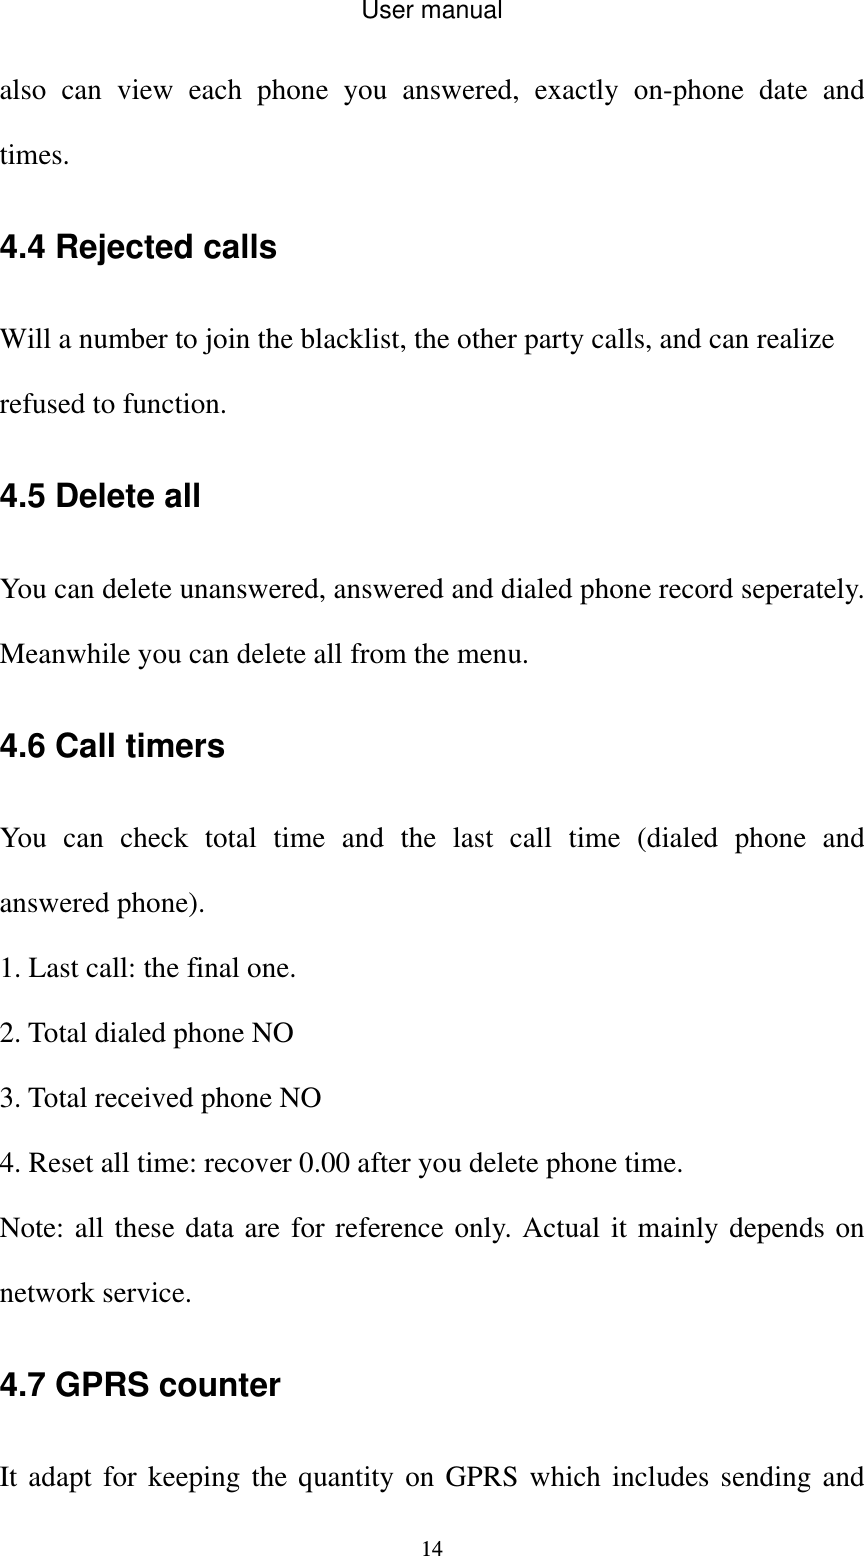 User manual  14also can view each phone you answered, exactly on-phone date and times. 4.4 Rejected calls Will a number to join the blacklist, the other party calls, and can realize refused to function. 4.5 Delete all     You can delete unanswered, answered and dialed phone record seperately. Meanwhile you can delete all from the menu. 4.6 Call timers You can check total time and the last call time (dialed phone and answered phone). 1. Last call: the final one. 2. Total dialed phone NO 3. Total received phone NO 4. Reset all time: recover 0.00 after you delete phone time. Note: all these data are for reference only. Actual it mainly depends on network service. 4.7 GPRS counter It adapt for keeping the quantity on GPRS which includes sending and 